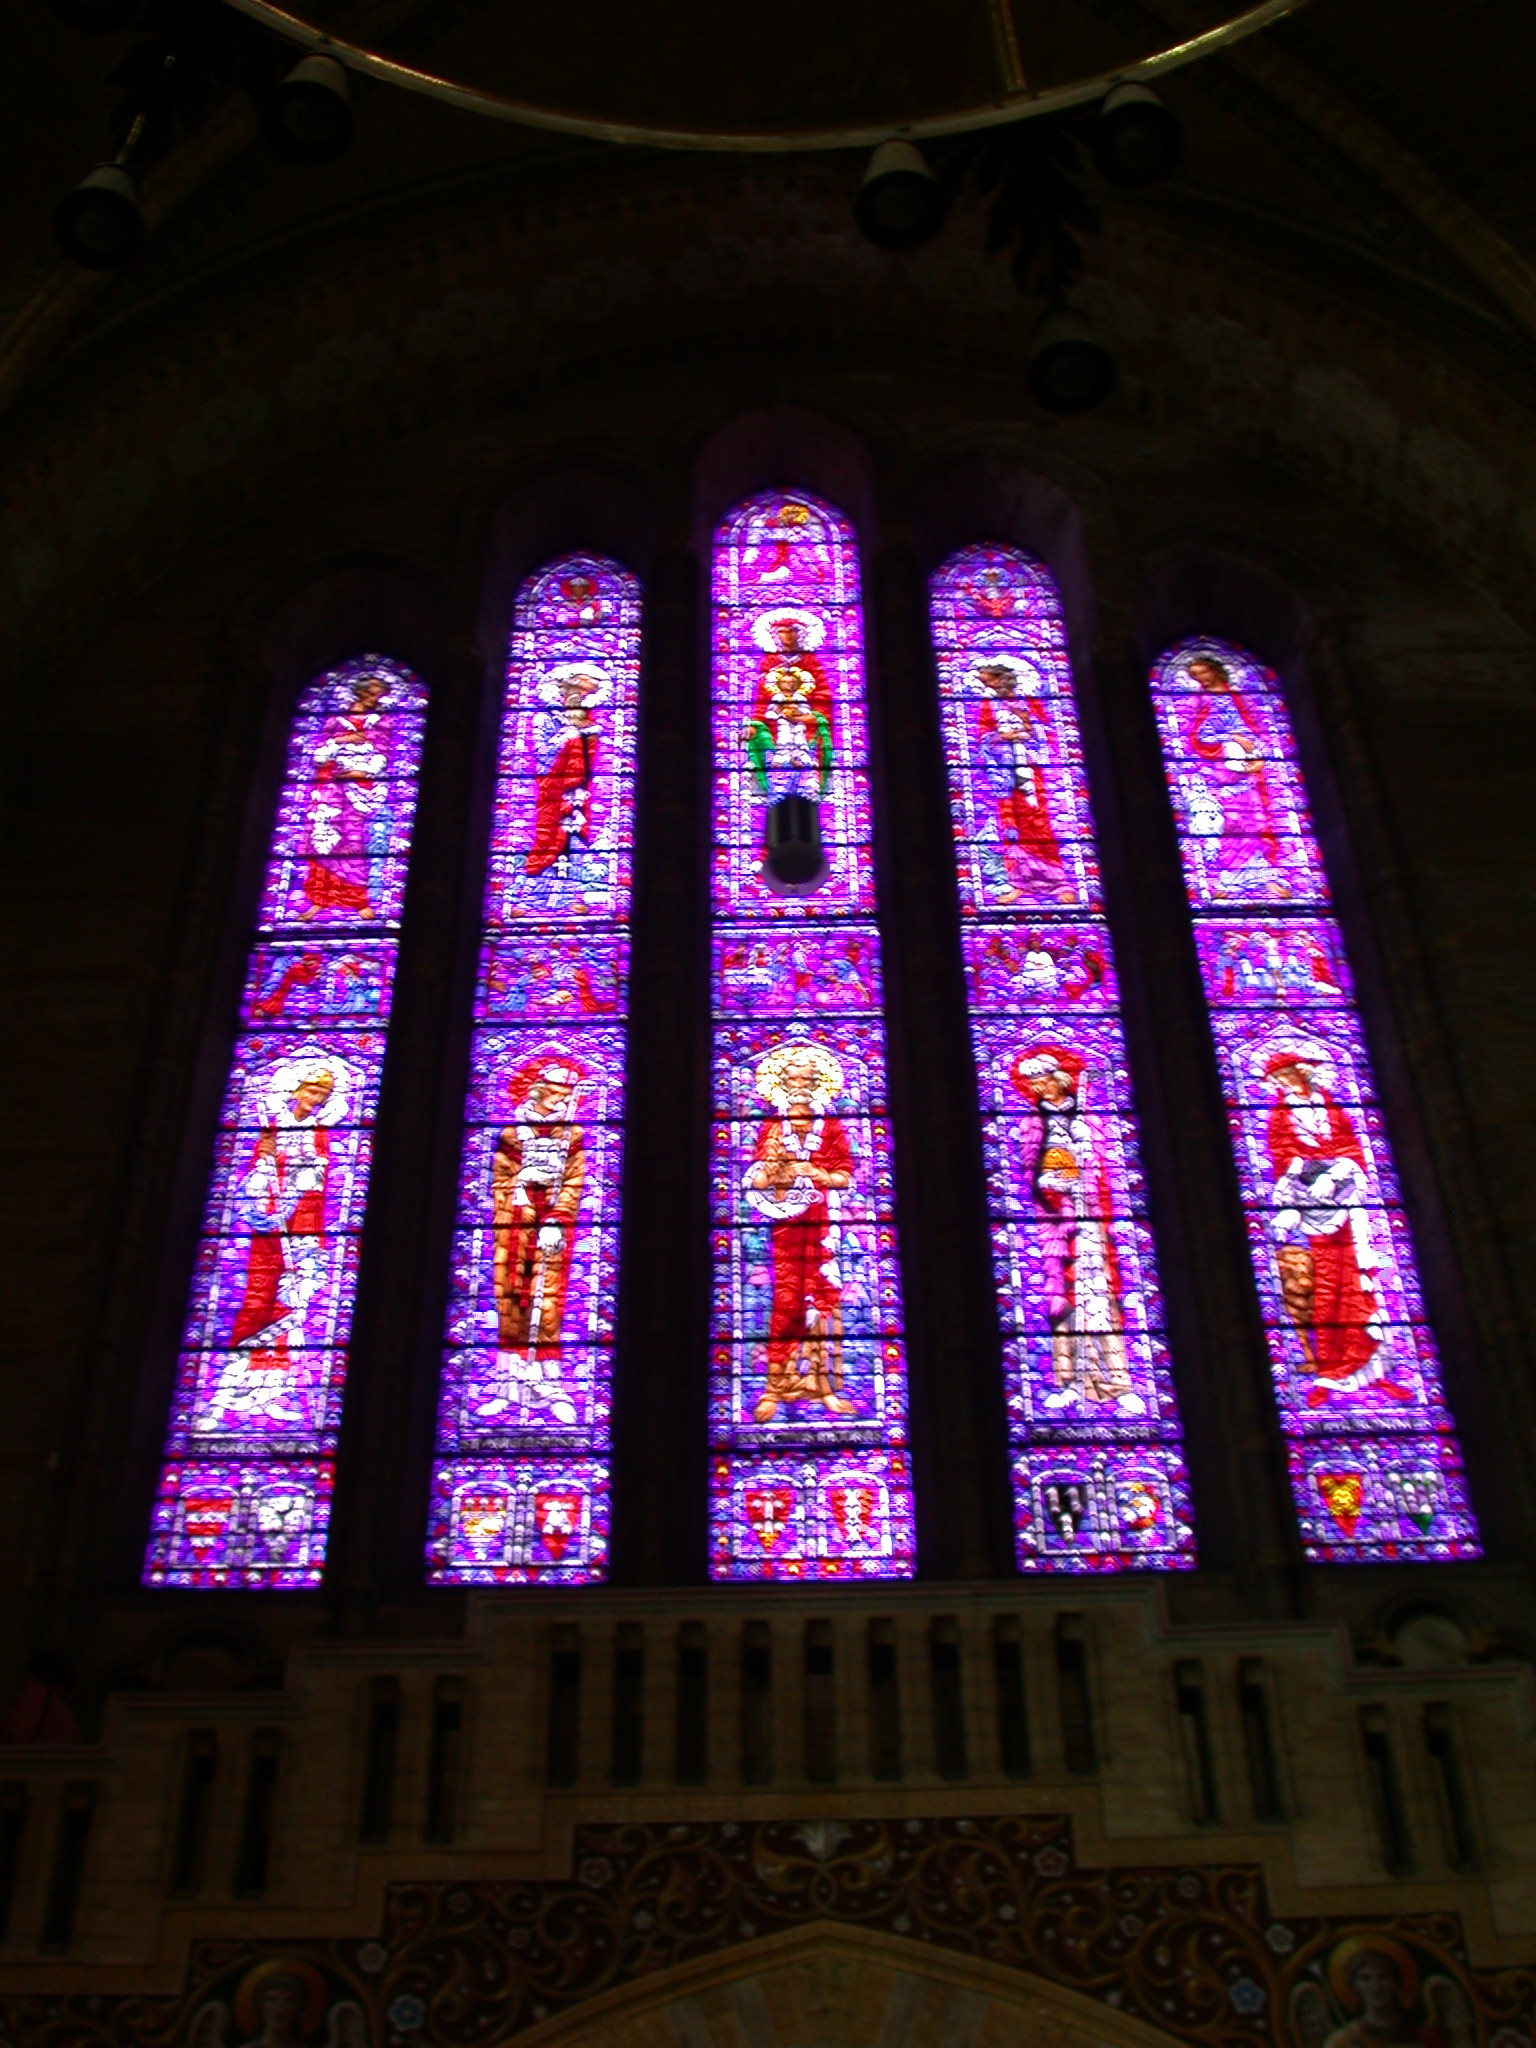 windows church stained glass relion religious purple saints saint free images free textures royalty